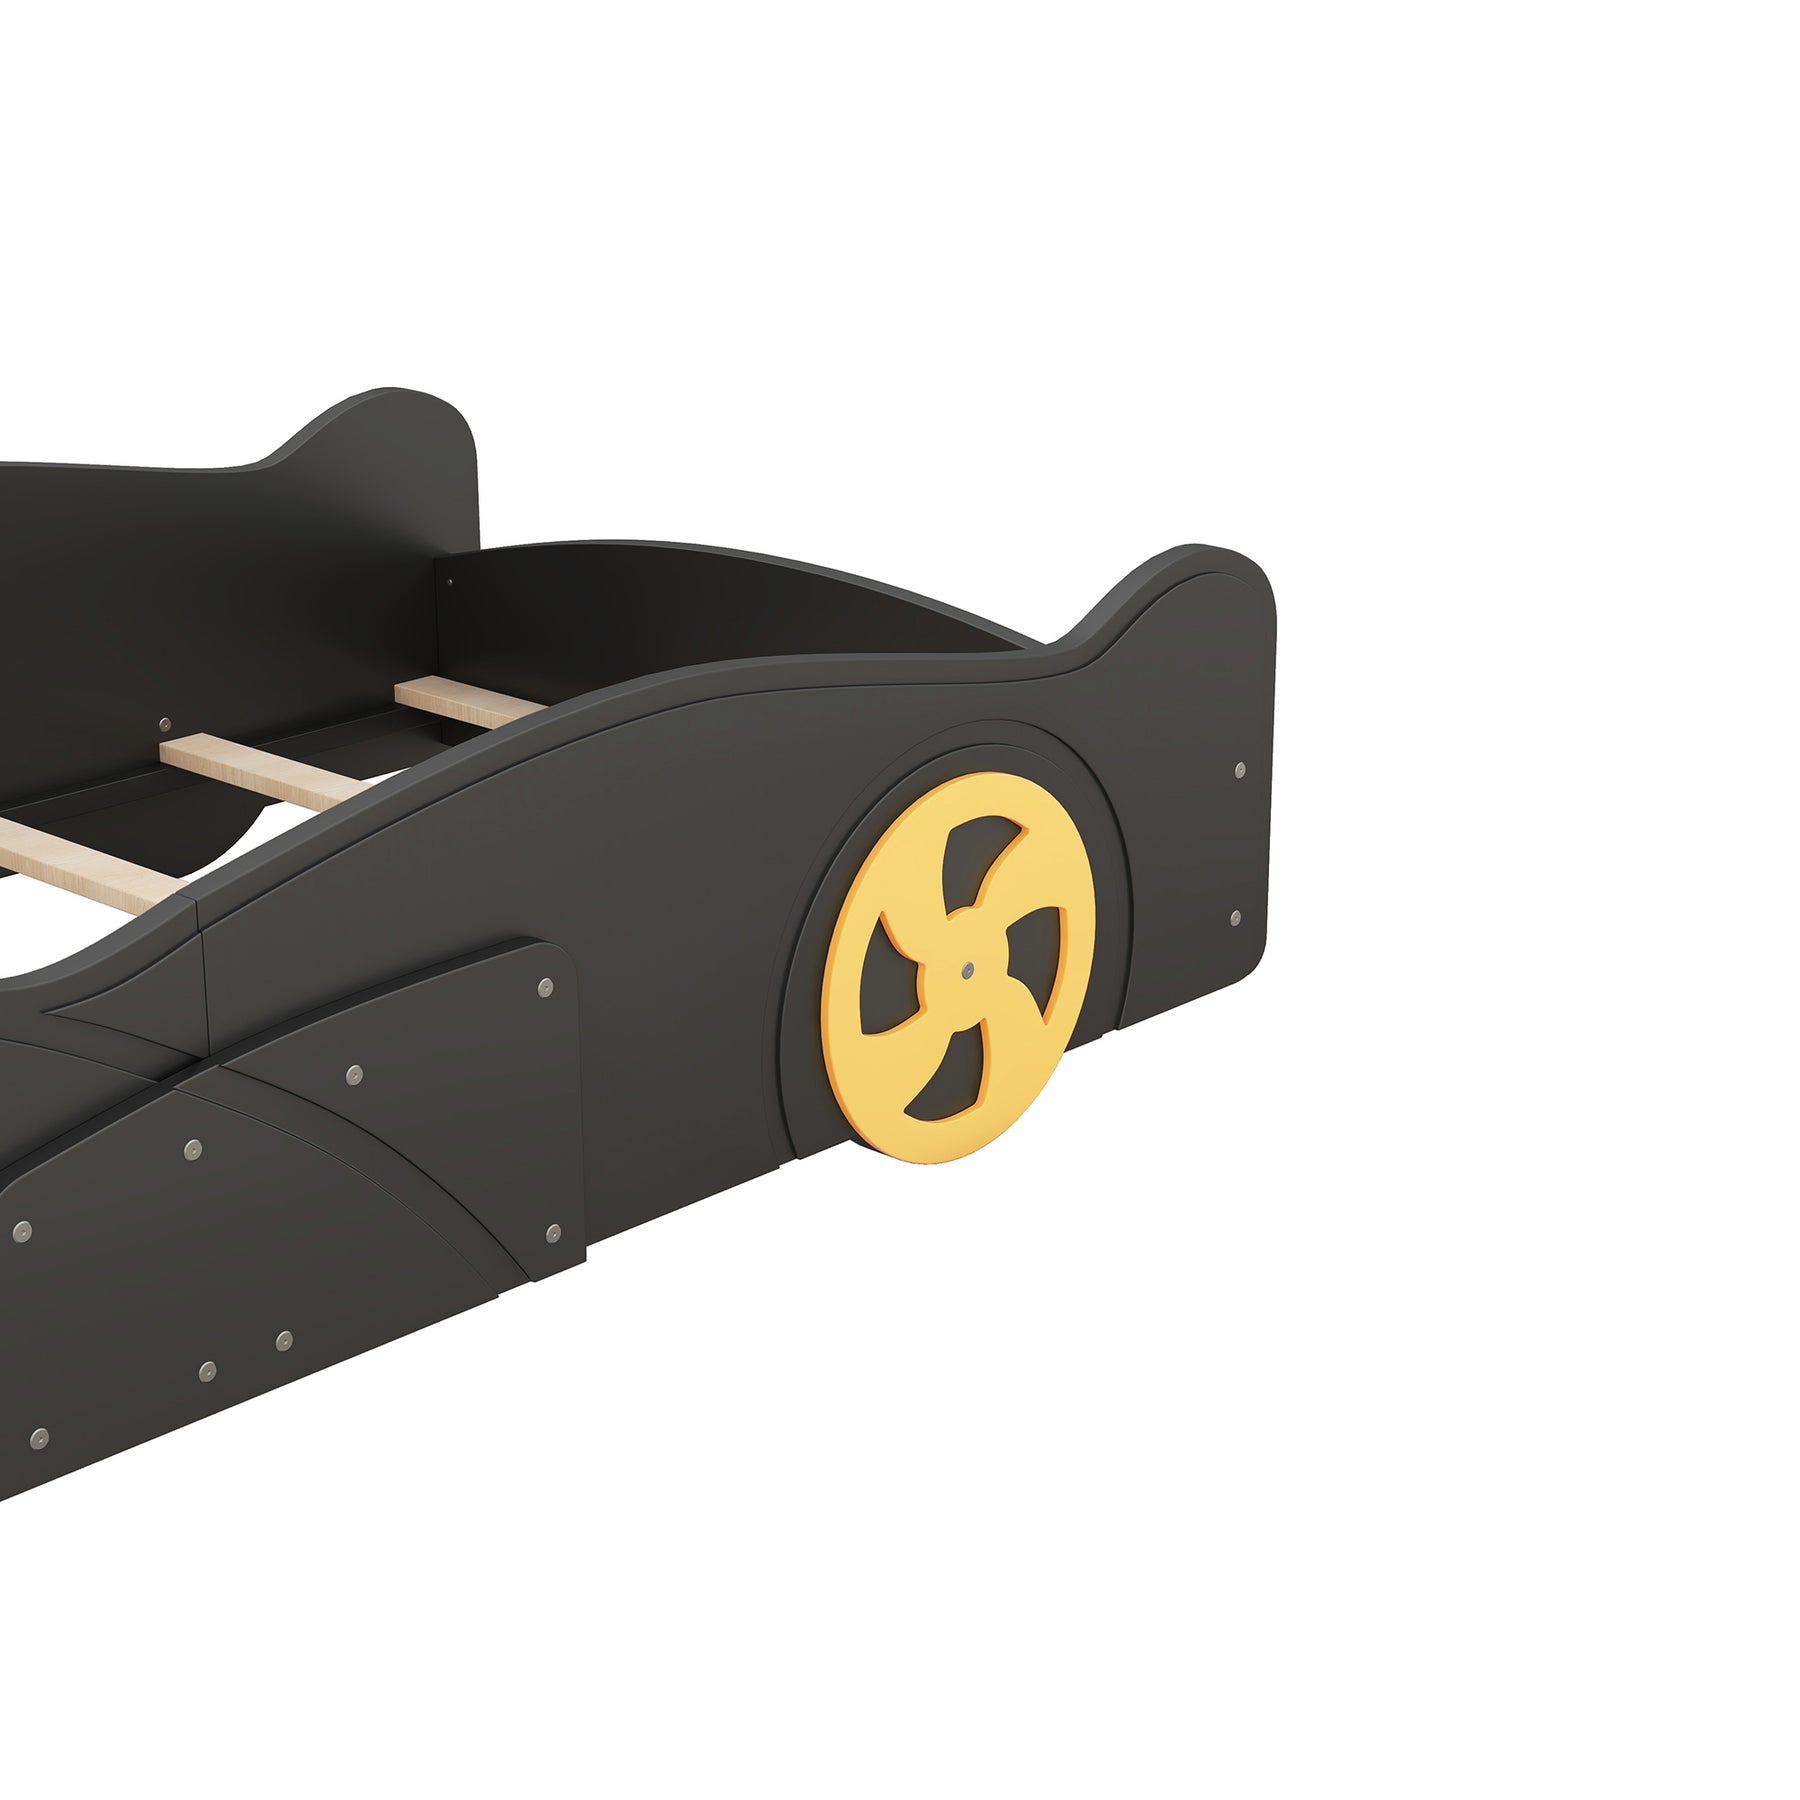 Twin Size Race Car-Shaped Platform Bed with Wheels and Storage, Black+Yellow - Tonkn